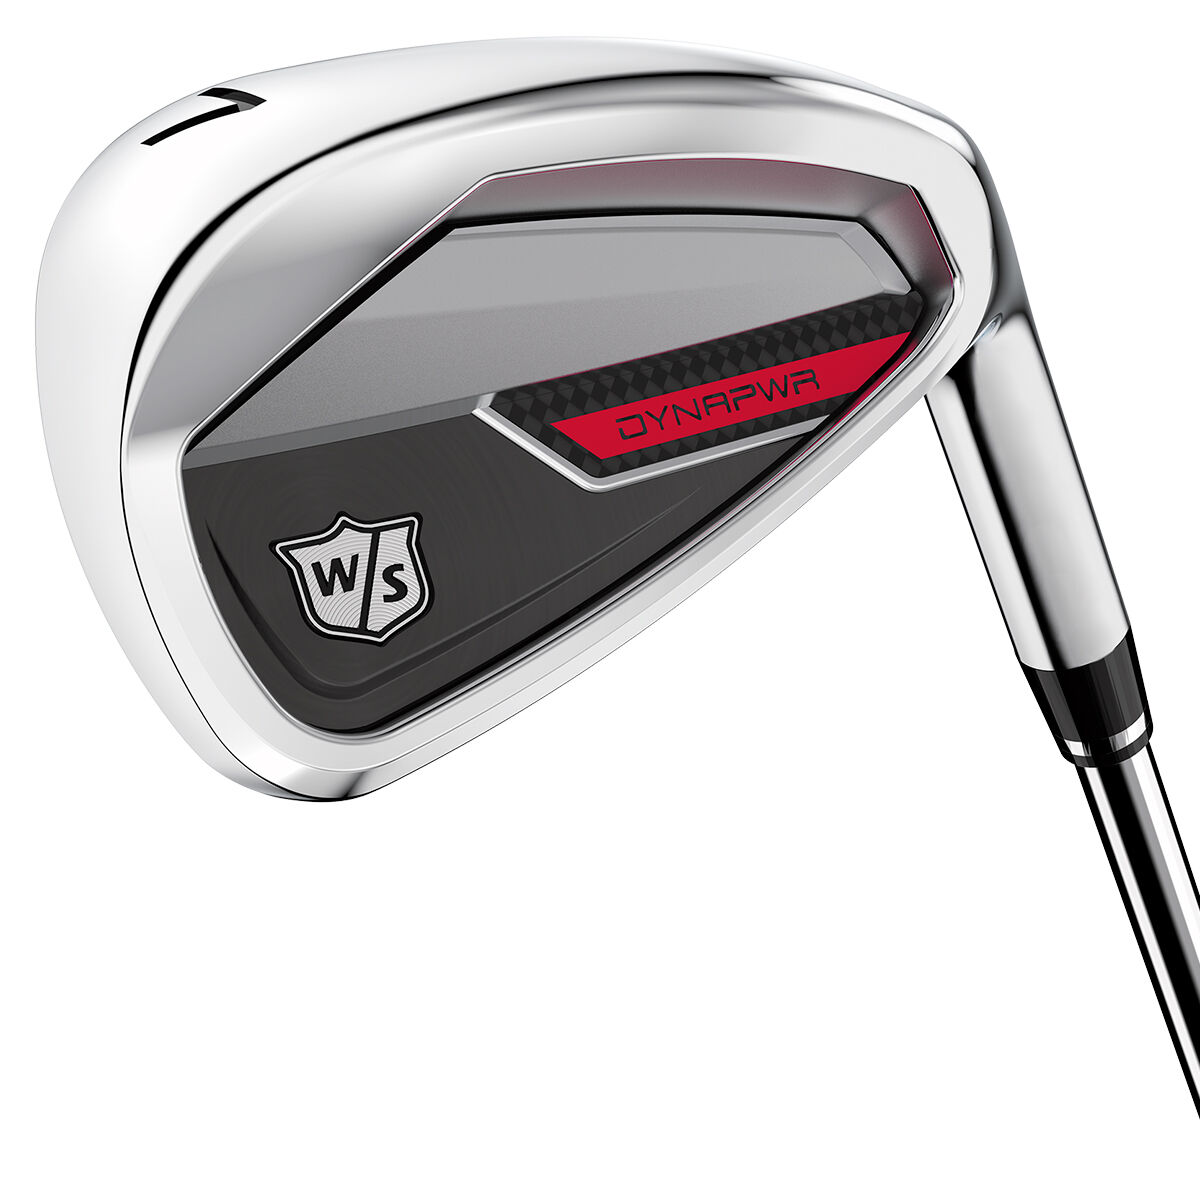 Wilson Staff Grey and Red Dynapower Steel Uniflex Right Hand 6 Golf Irons, Size: 5-Pw | American Golf